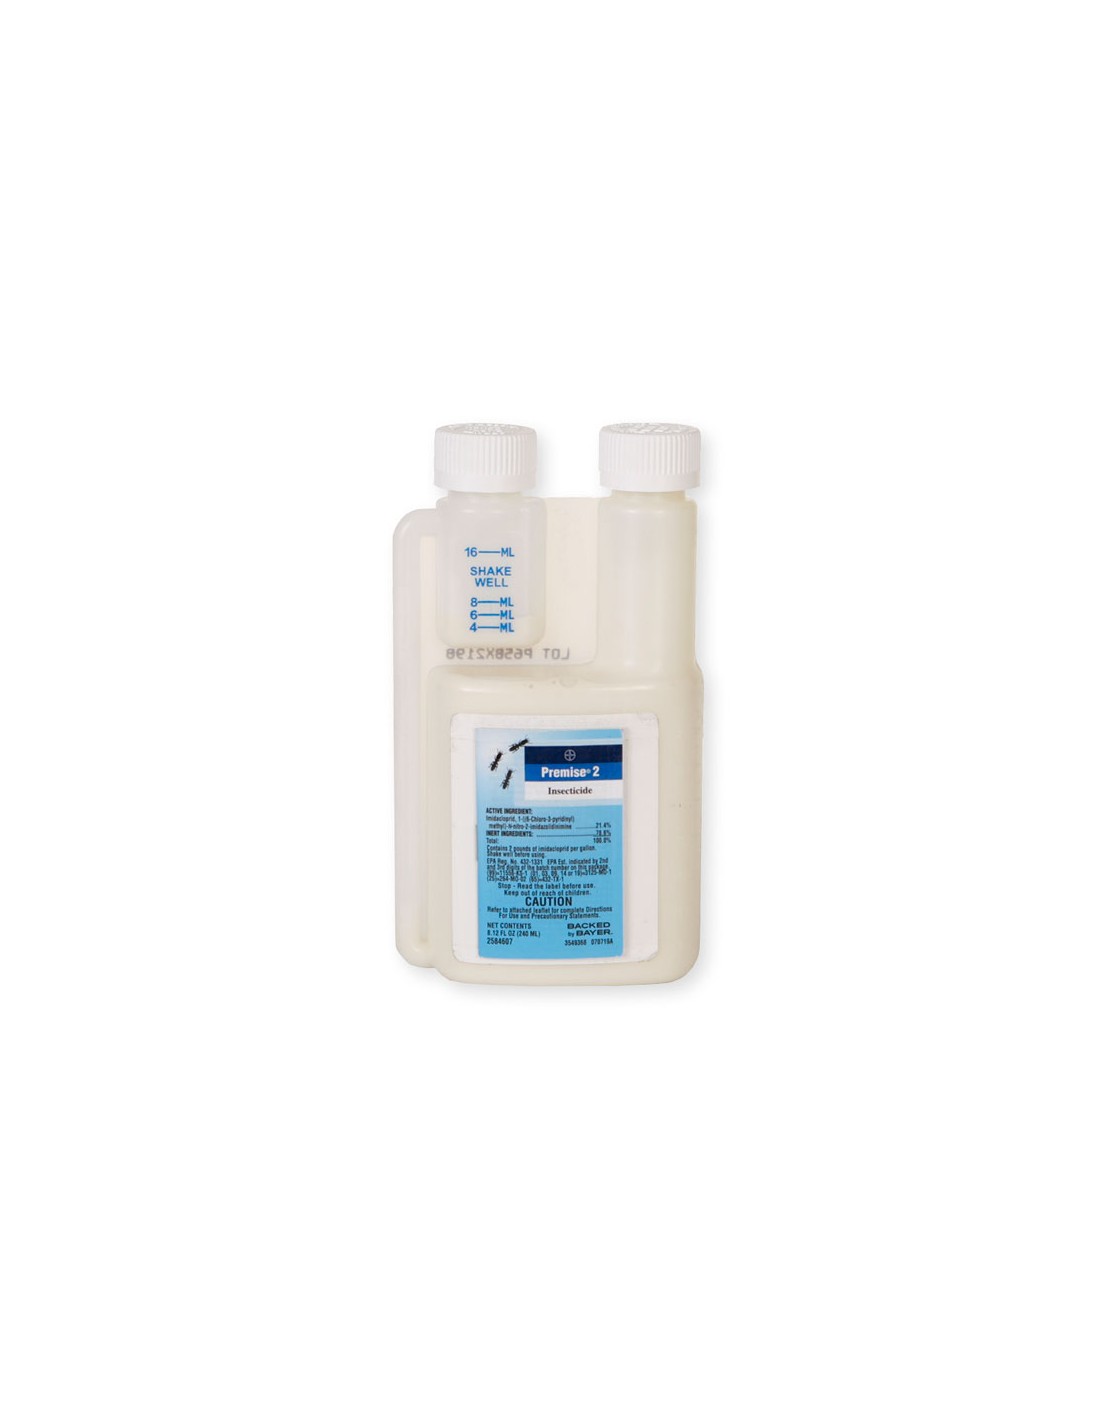 Do you have to buy the foaming sprayer or is there another liguid you mix with this to get the foaming aspect of pr